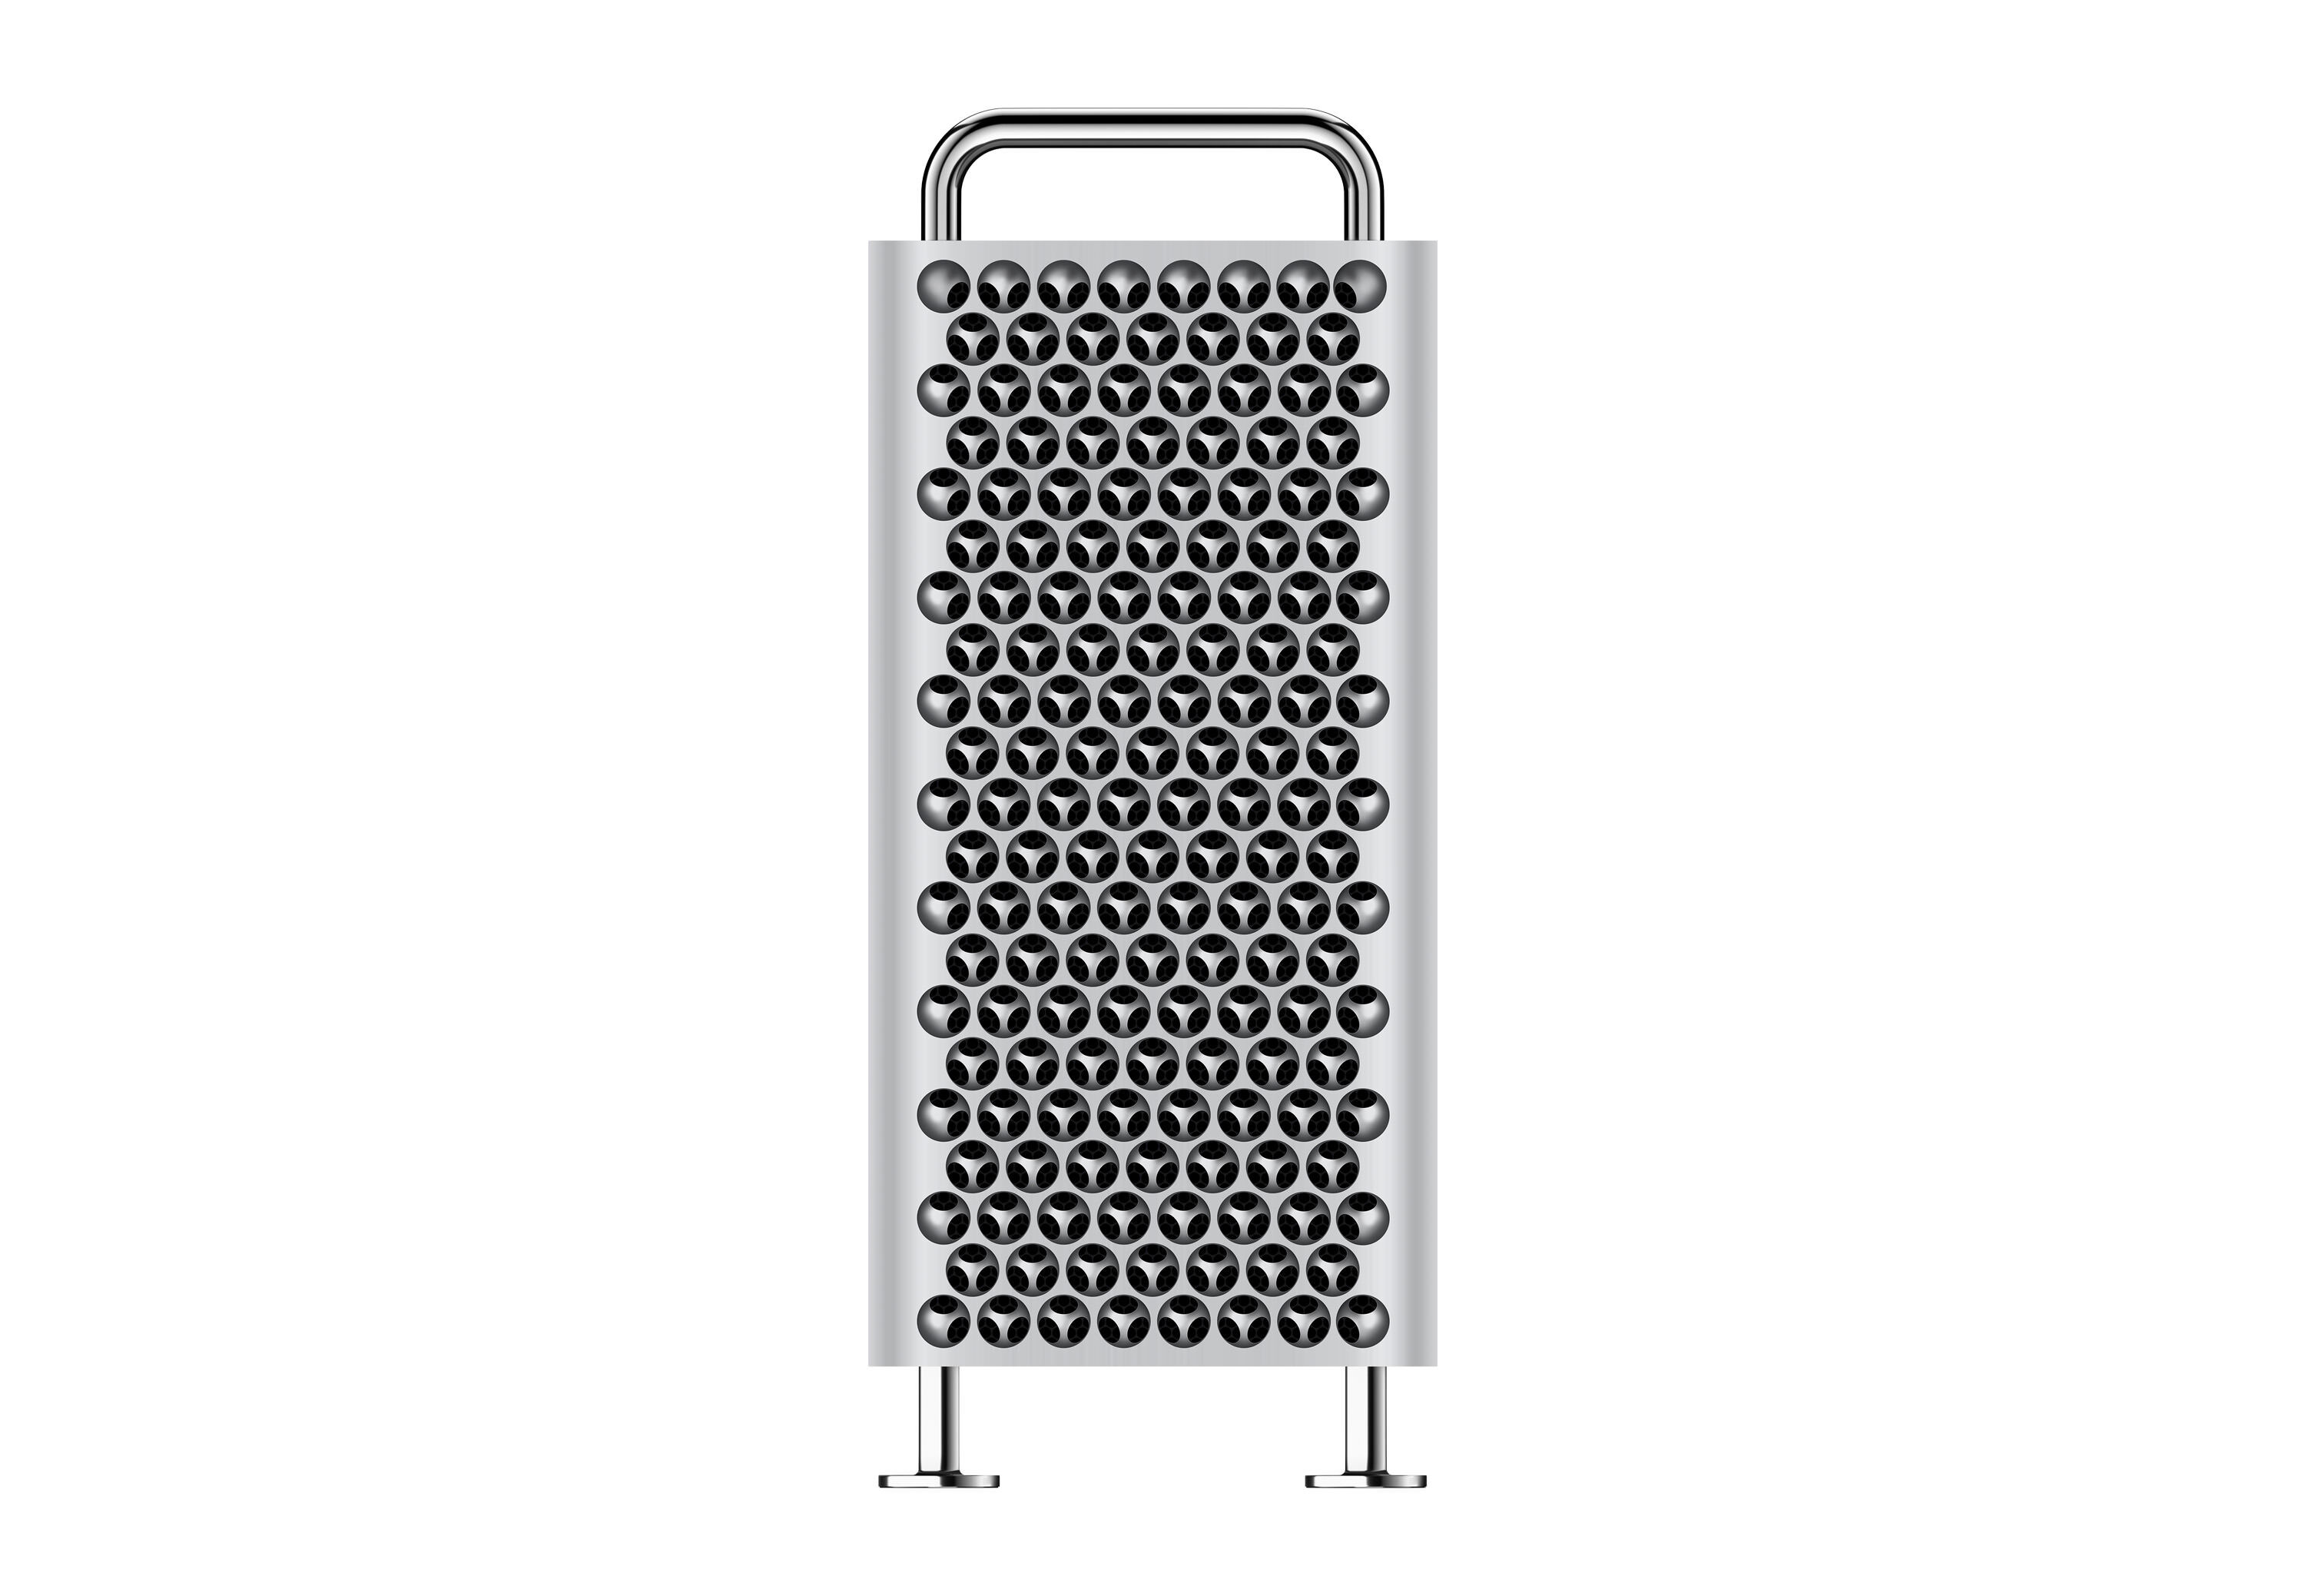 Front View of Mac Pro next to its Case Mockup FREE PSD